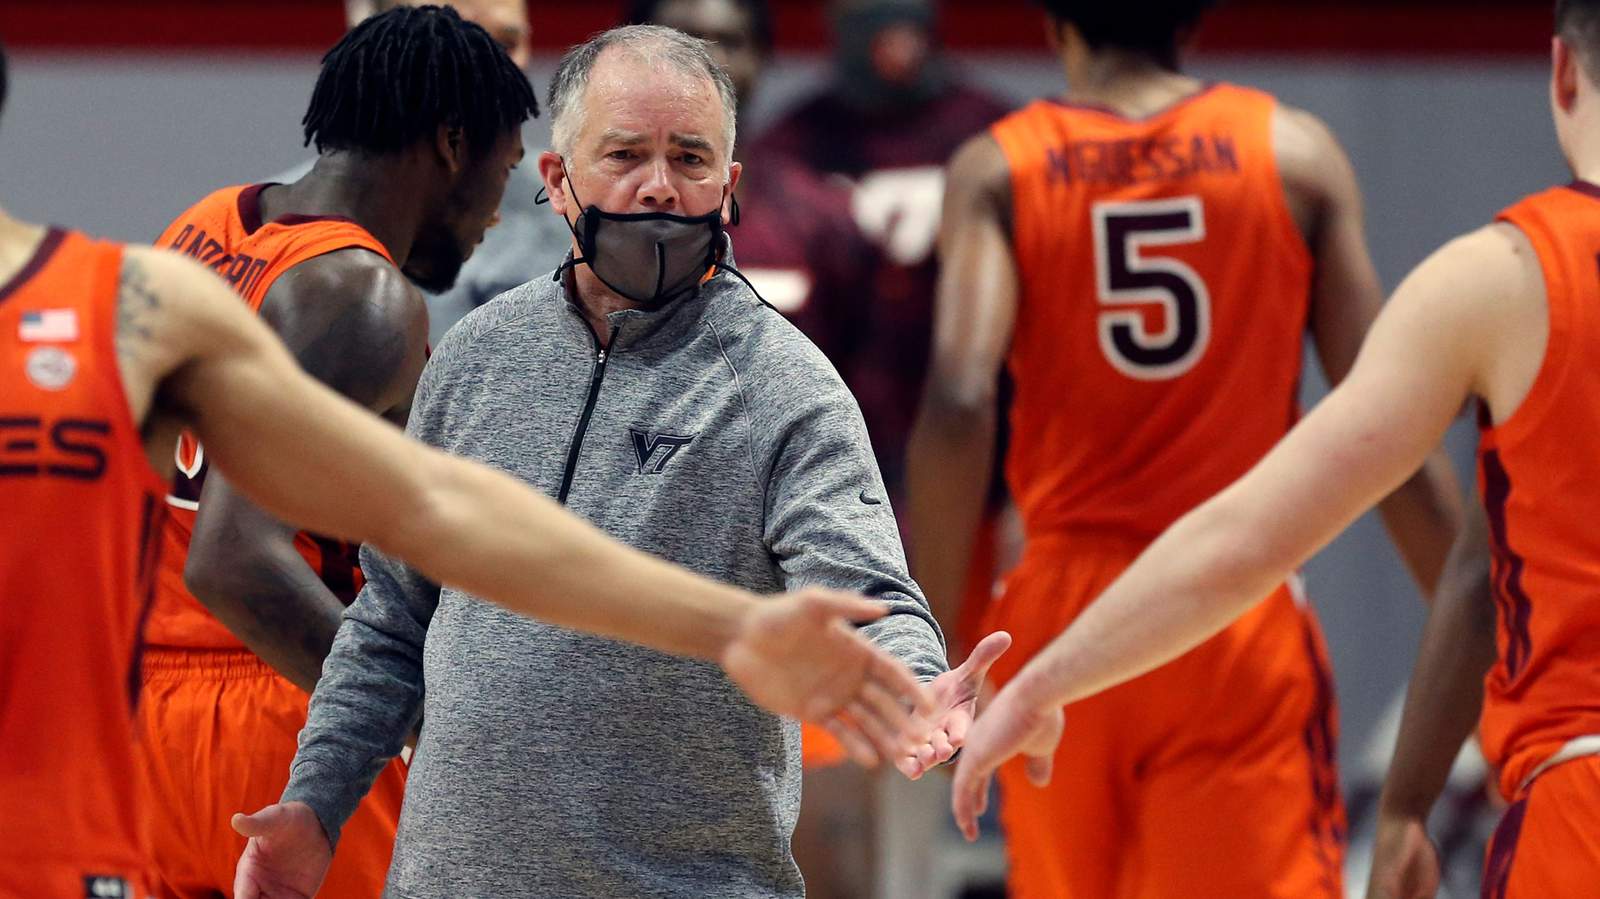 Virginia Tech coach Mike Young apologizes for Jehovah Witnesses comment